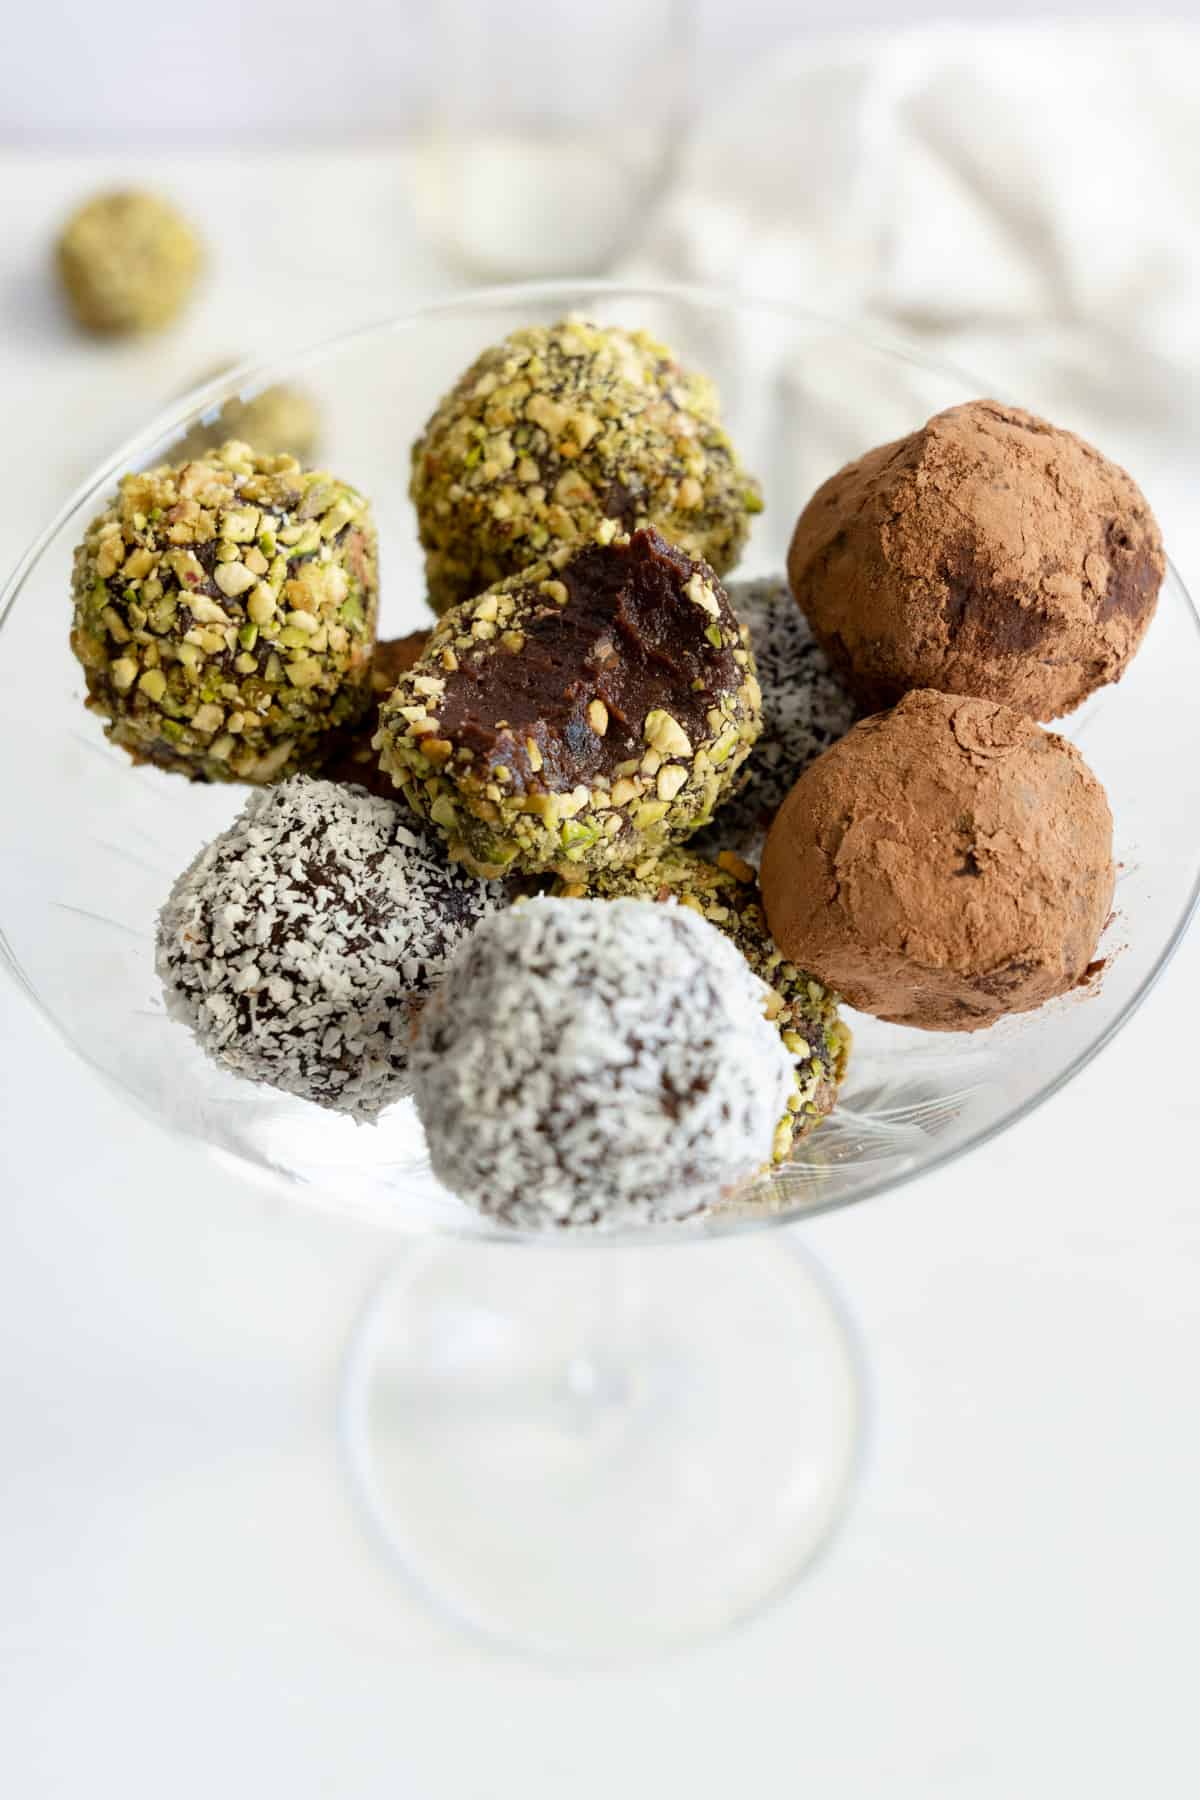 a champagn glass filled with chocolate date balls covered in either pistachio, cacao or coconut